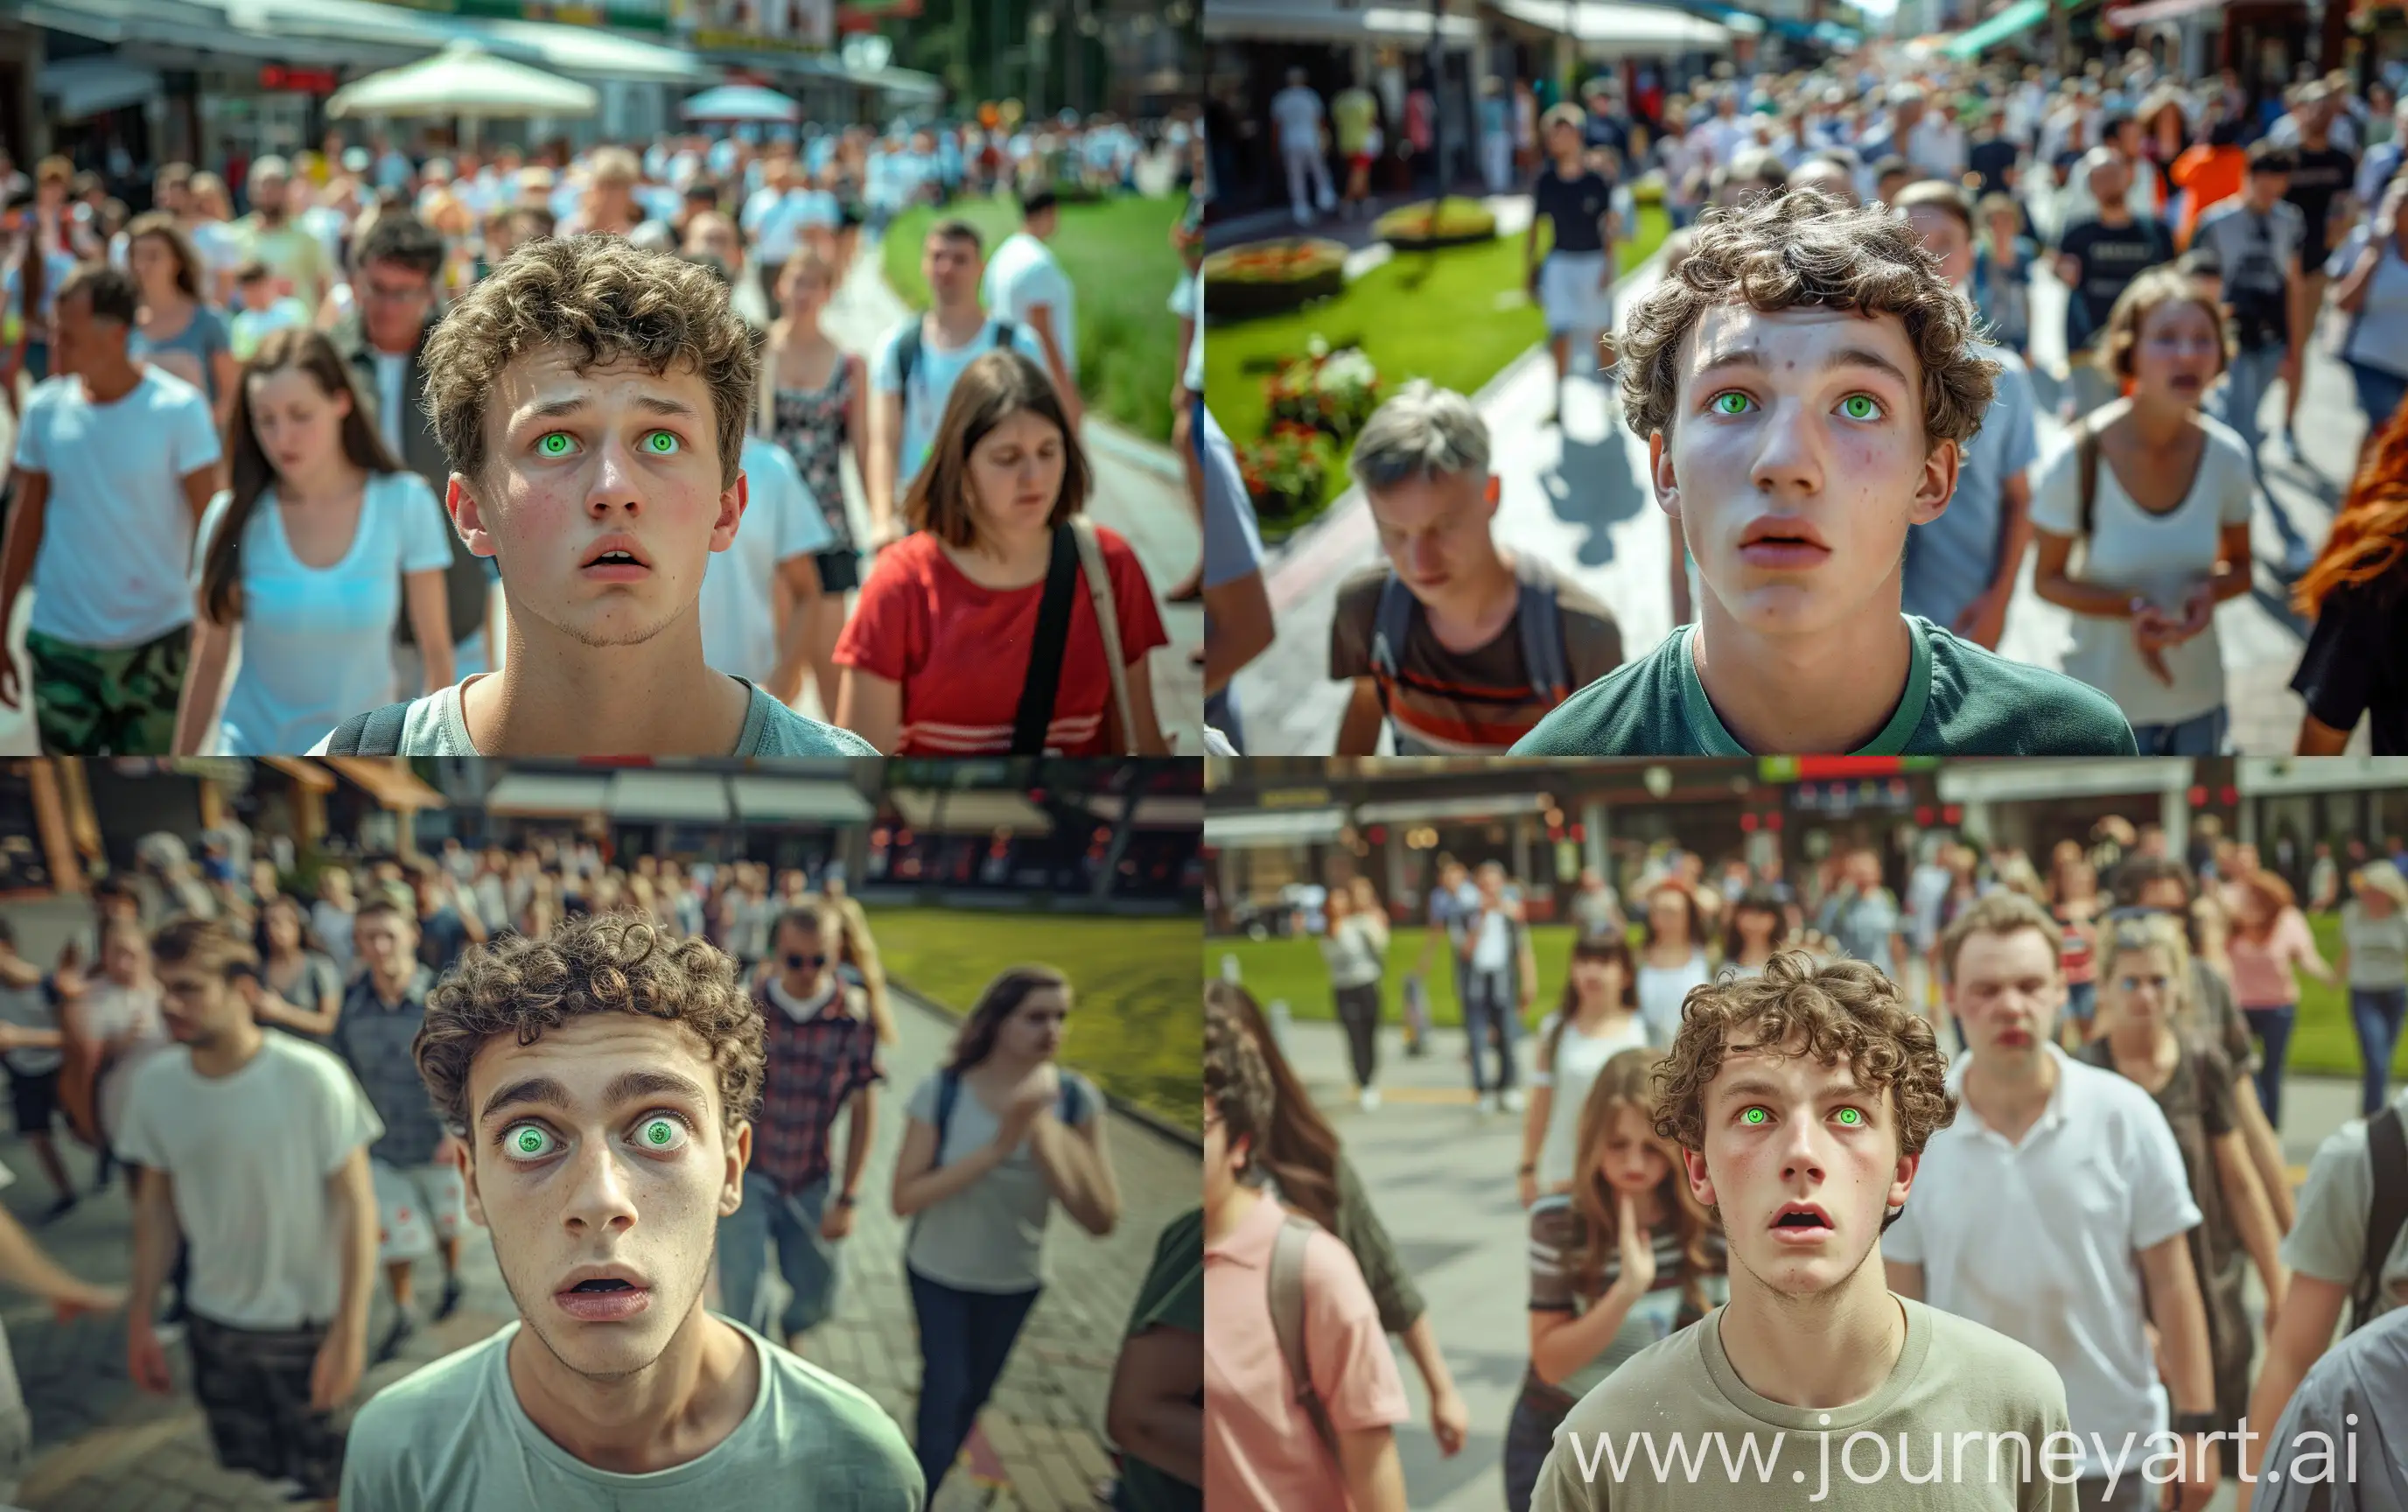 A young man with green eyes looks around amazedly, he is in a middle of many people in the crowd, they are walking with closed eyes, all the people are Europeans, urban area with shops and lawns in the background, realistic, photo Canon 18mm shot, wide view --ar 16:10 